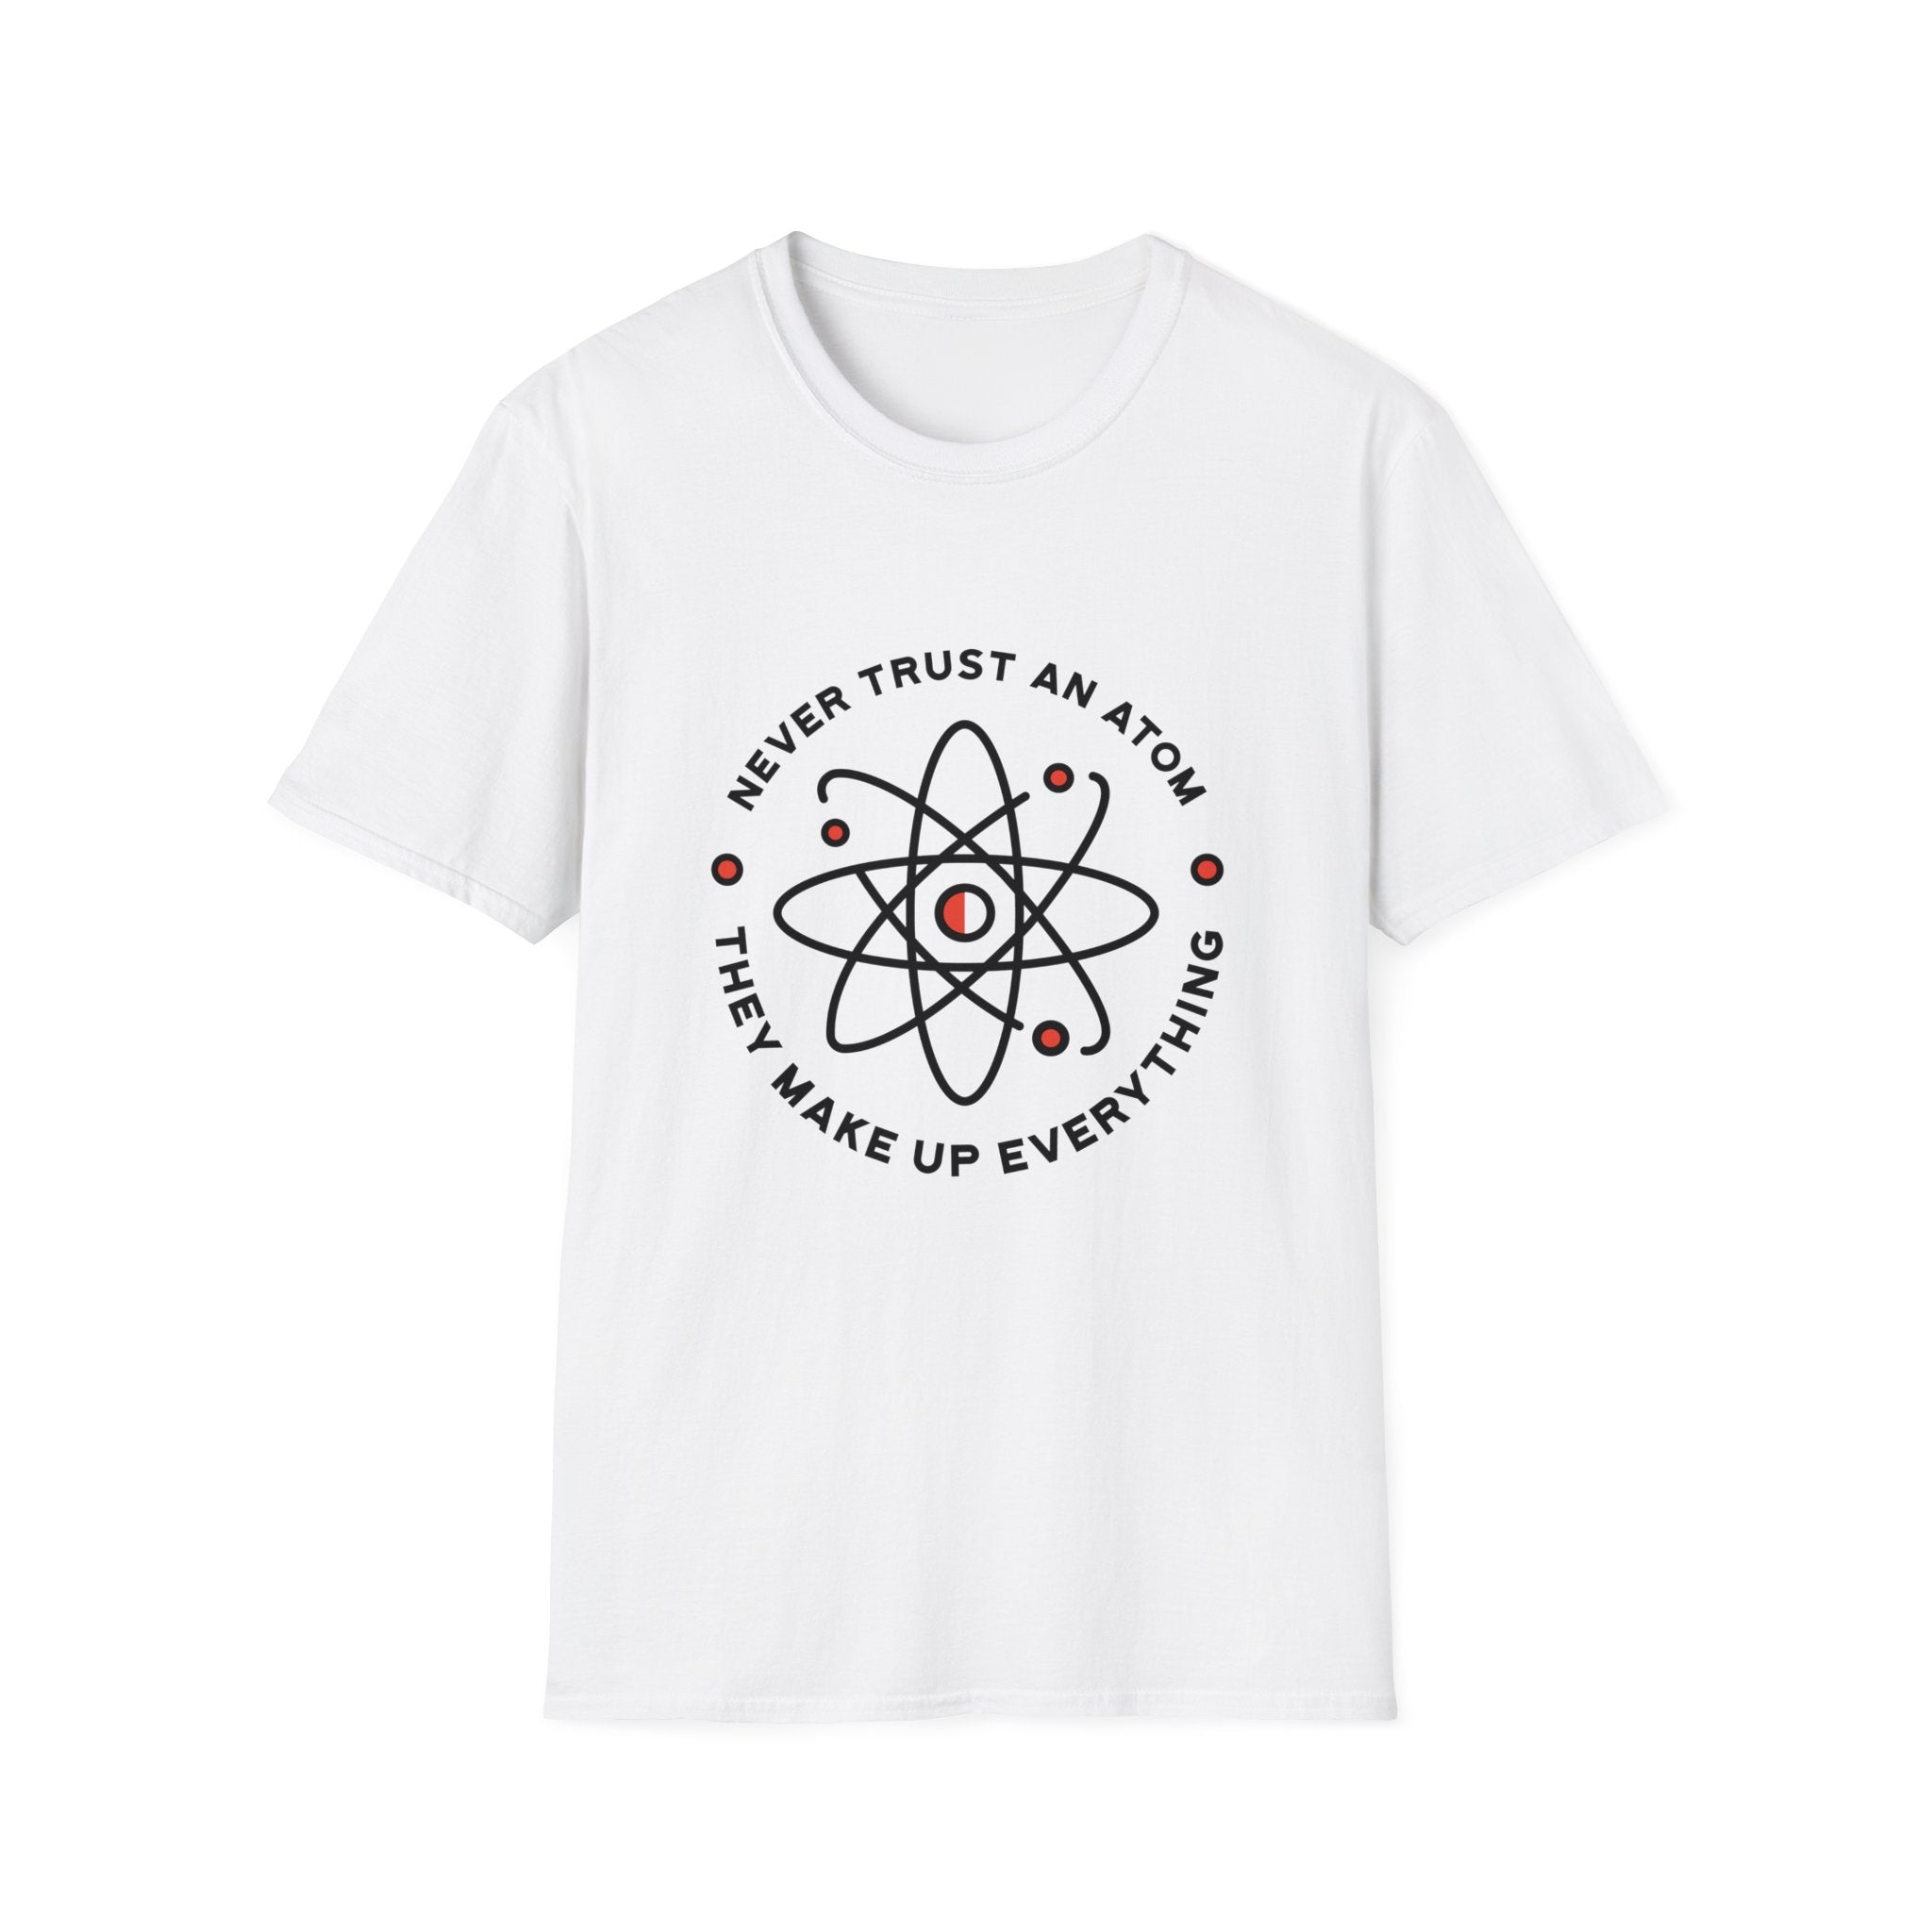 Never Trust an Atom They make up everything T-Shirt